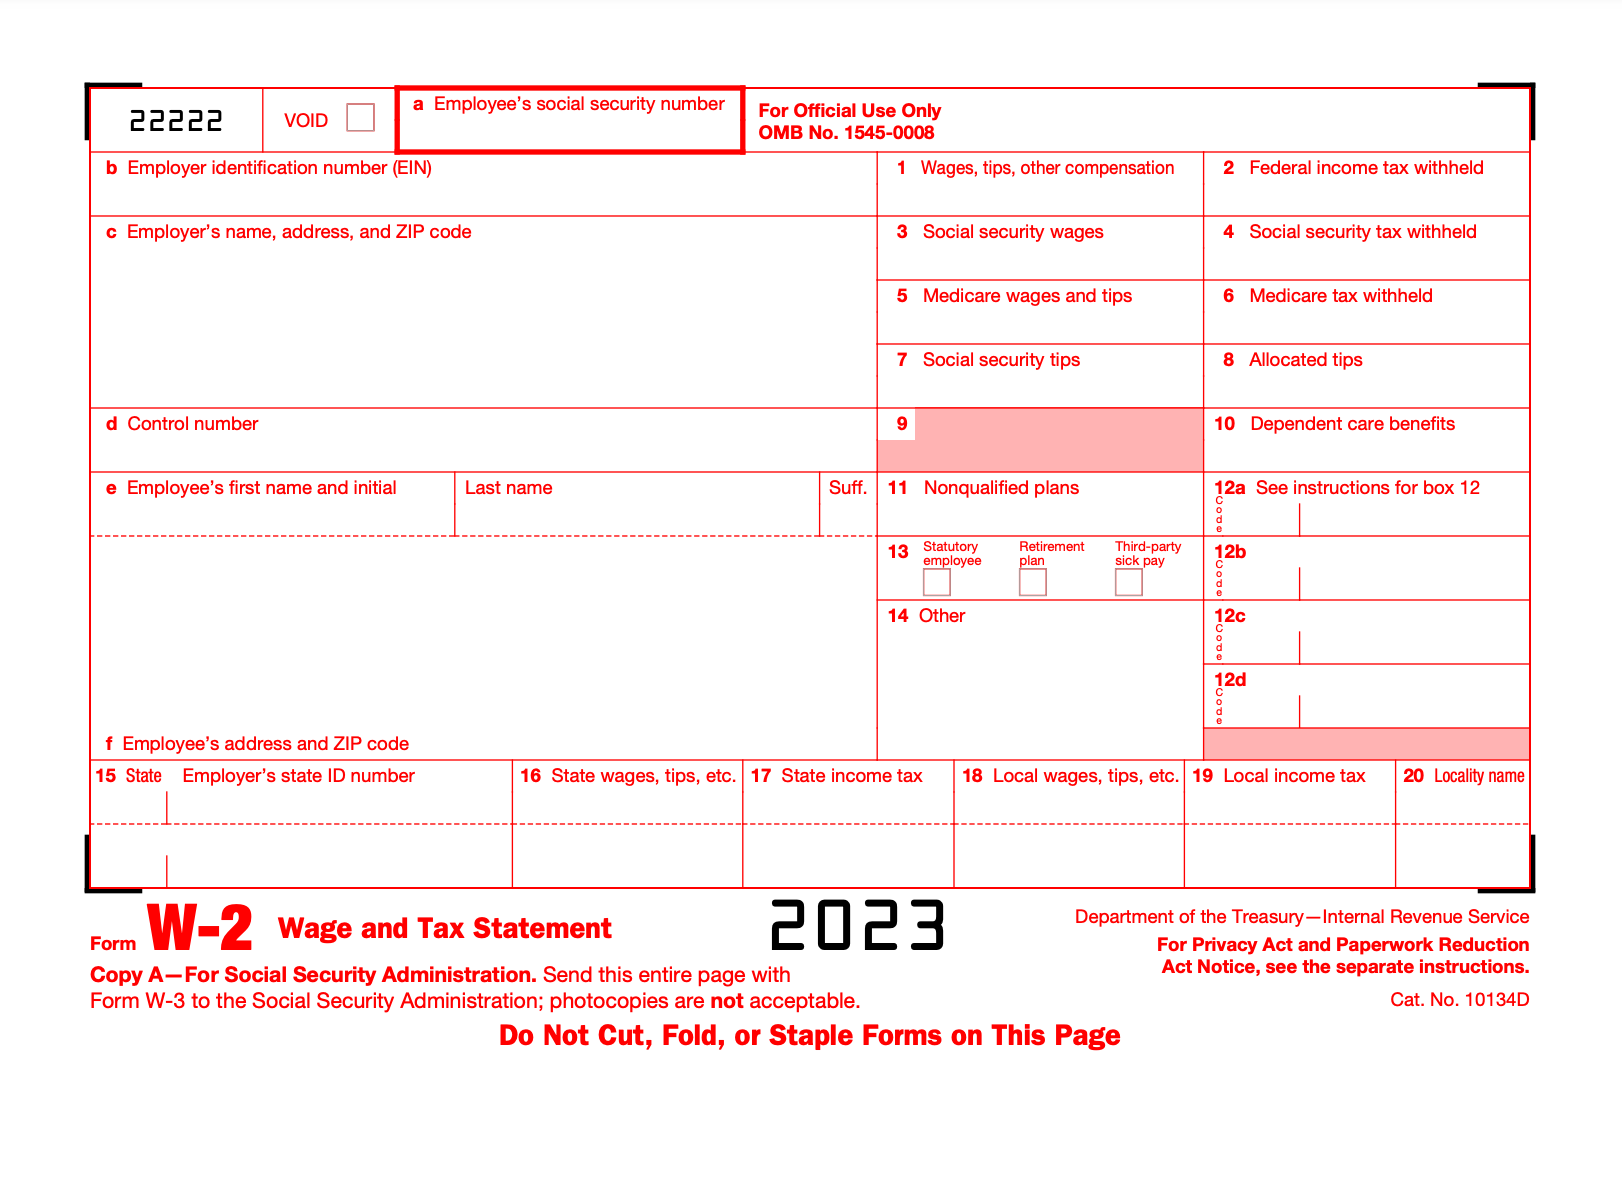 form W-2 for 2023